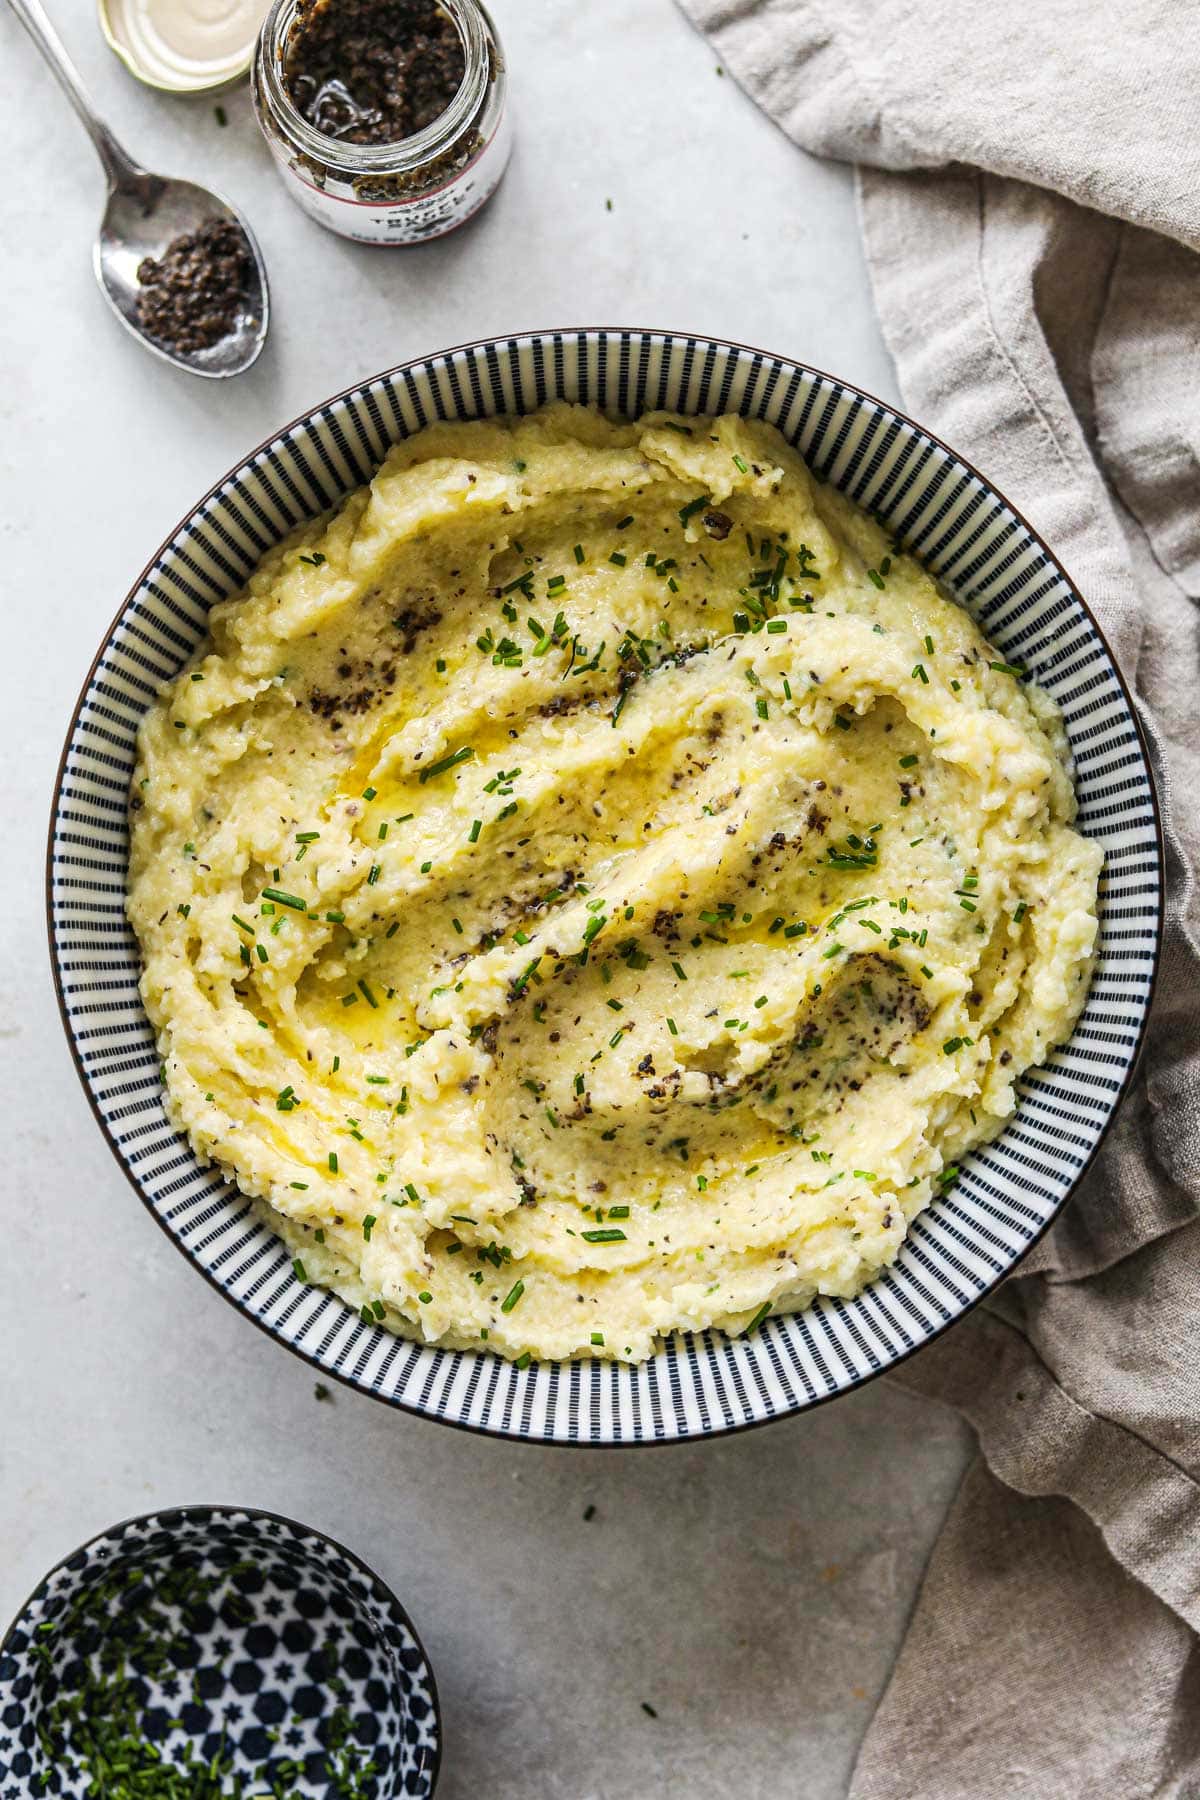 Creamy truffle mashed potatoes with creme fraiche and chives in a bowl with flecks of truffle puree in the potatoes.